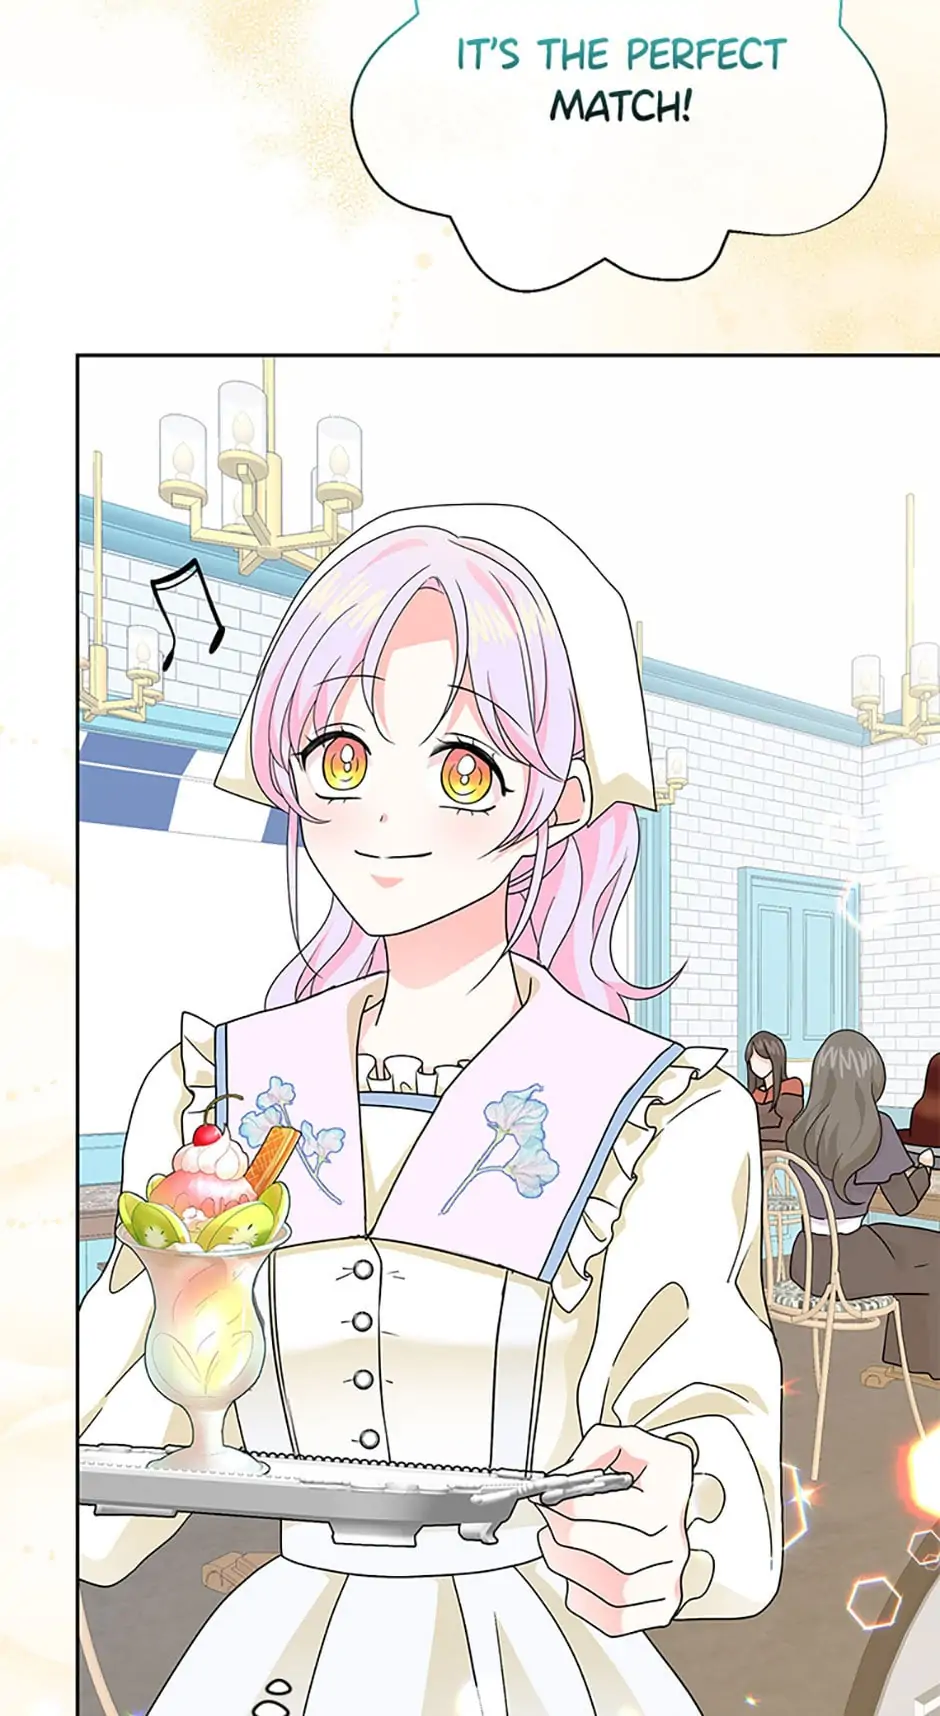 She came back and opened a dessert shop chapter 38